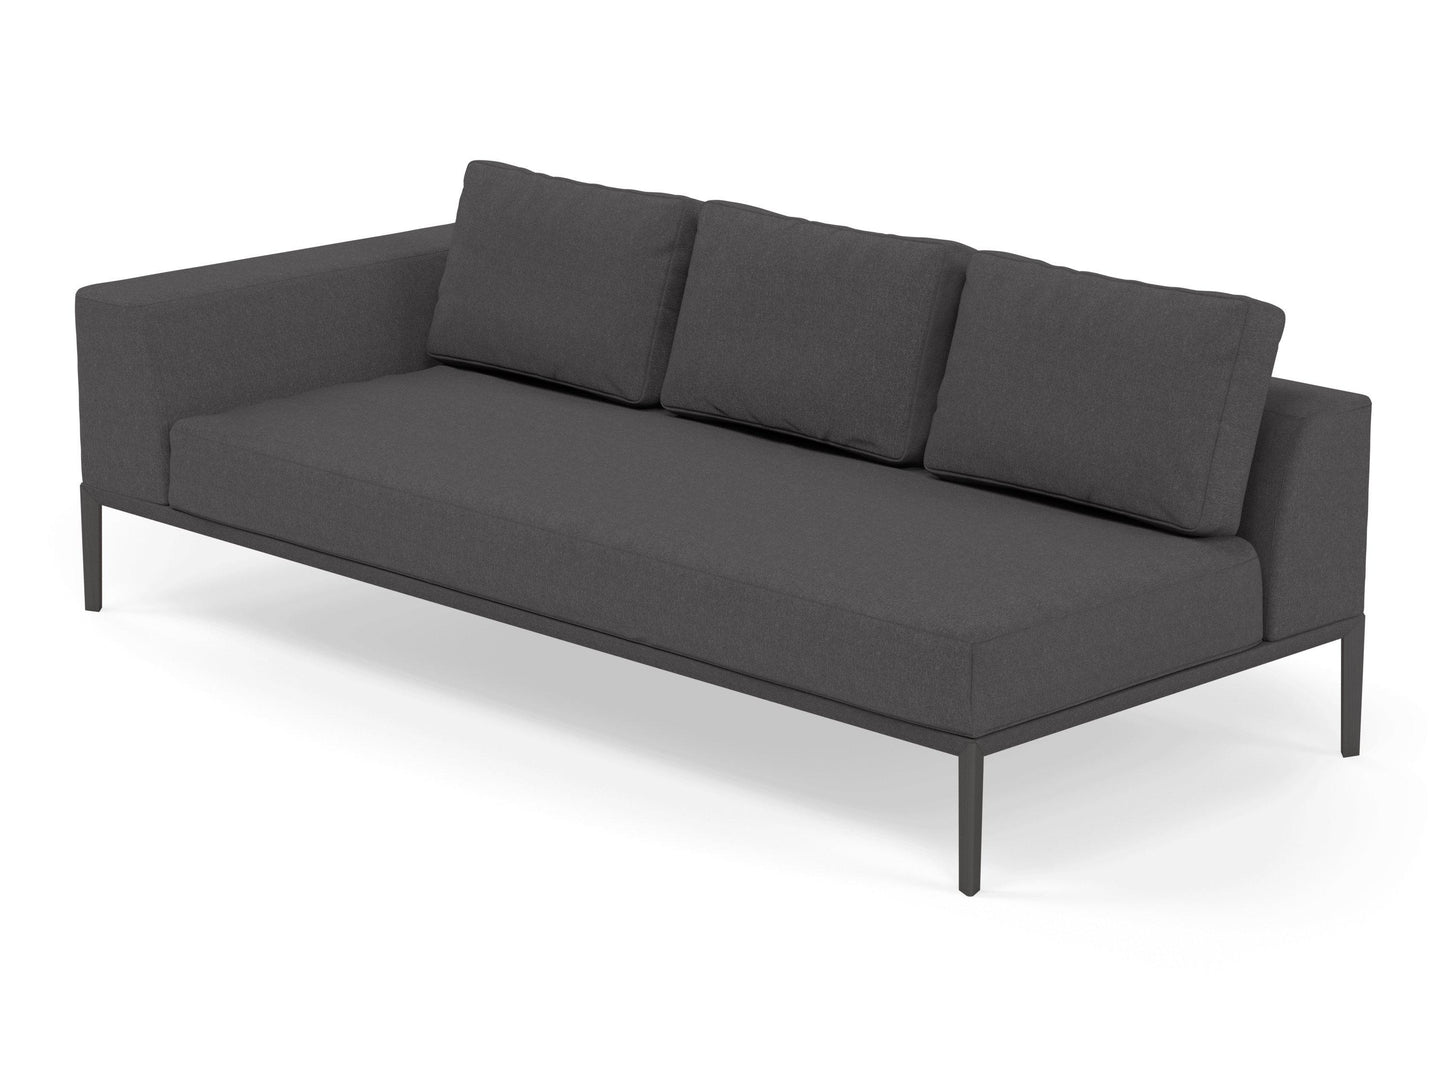 Modern 3 Seater Chaise Lounge Style Sofa with Right Armrest in Slate Grey Fabric-Distinct Designs (London) Ltd